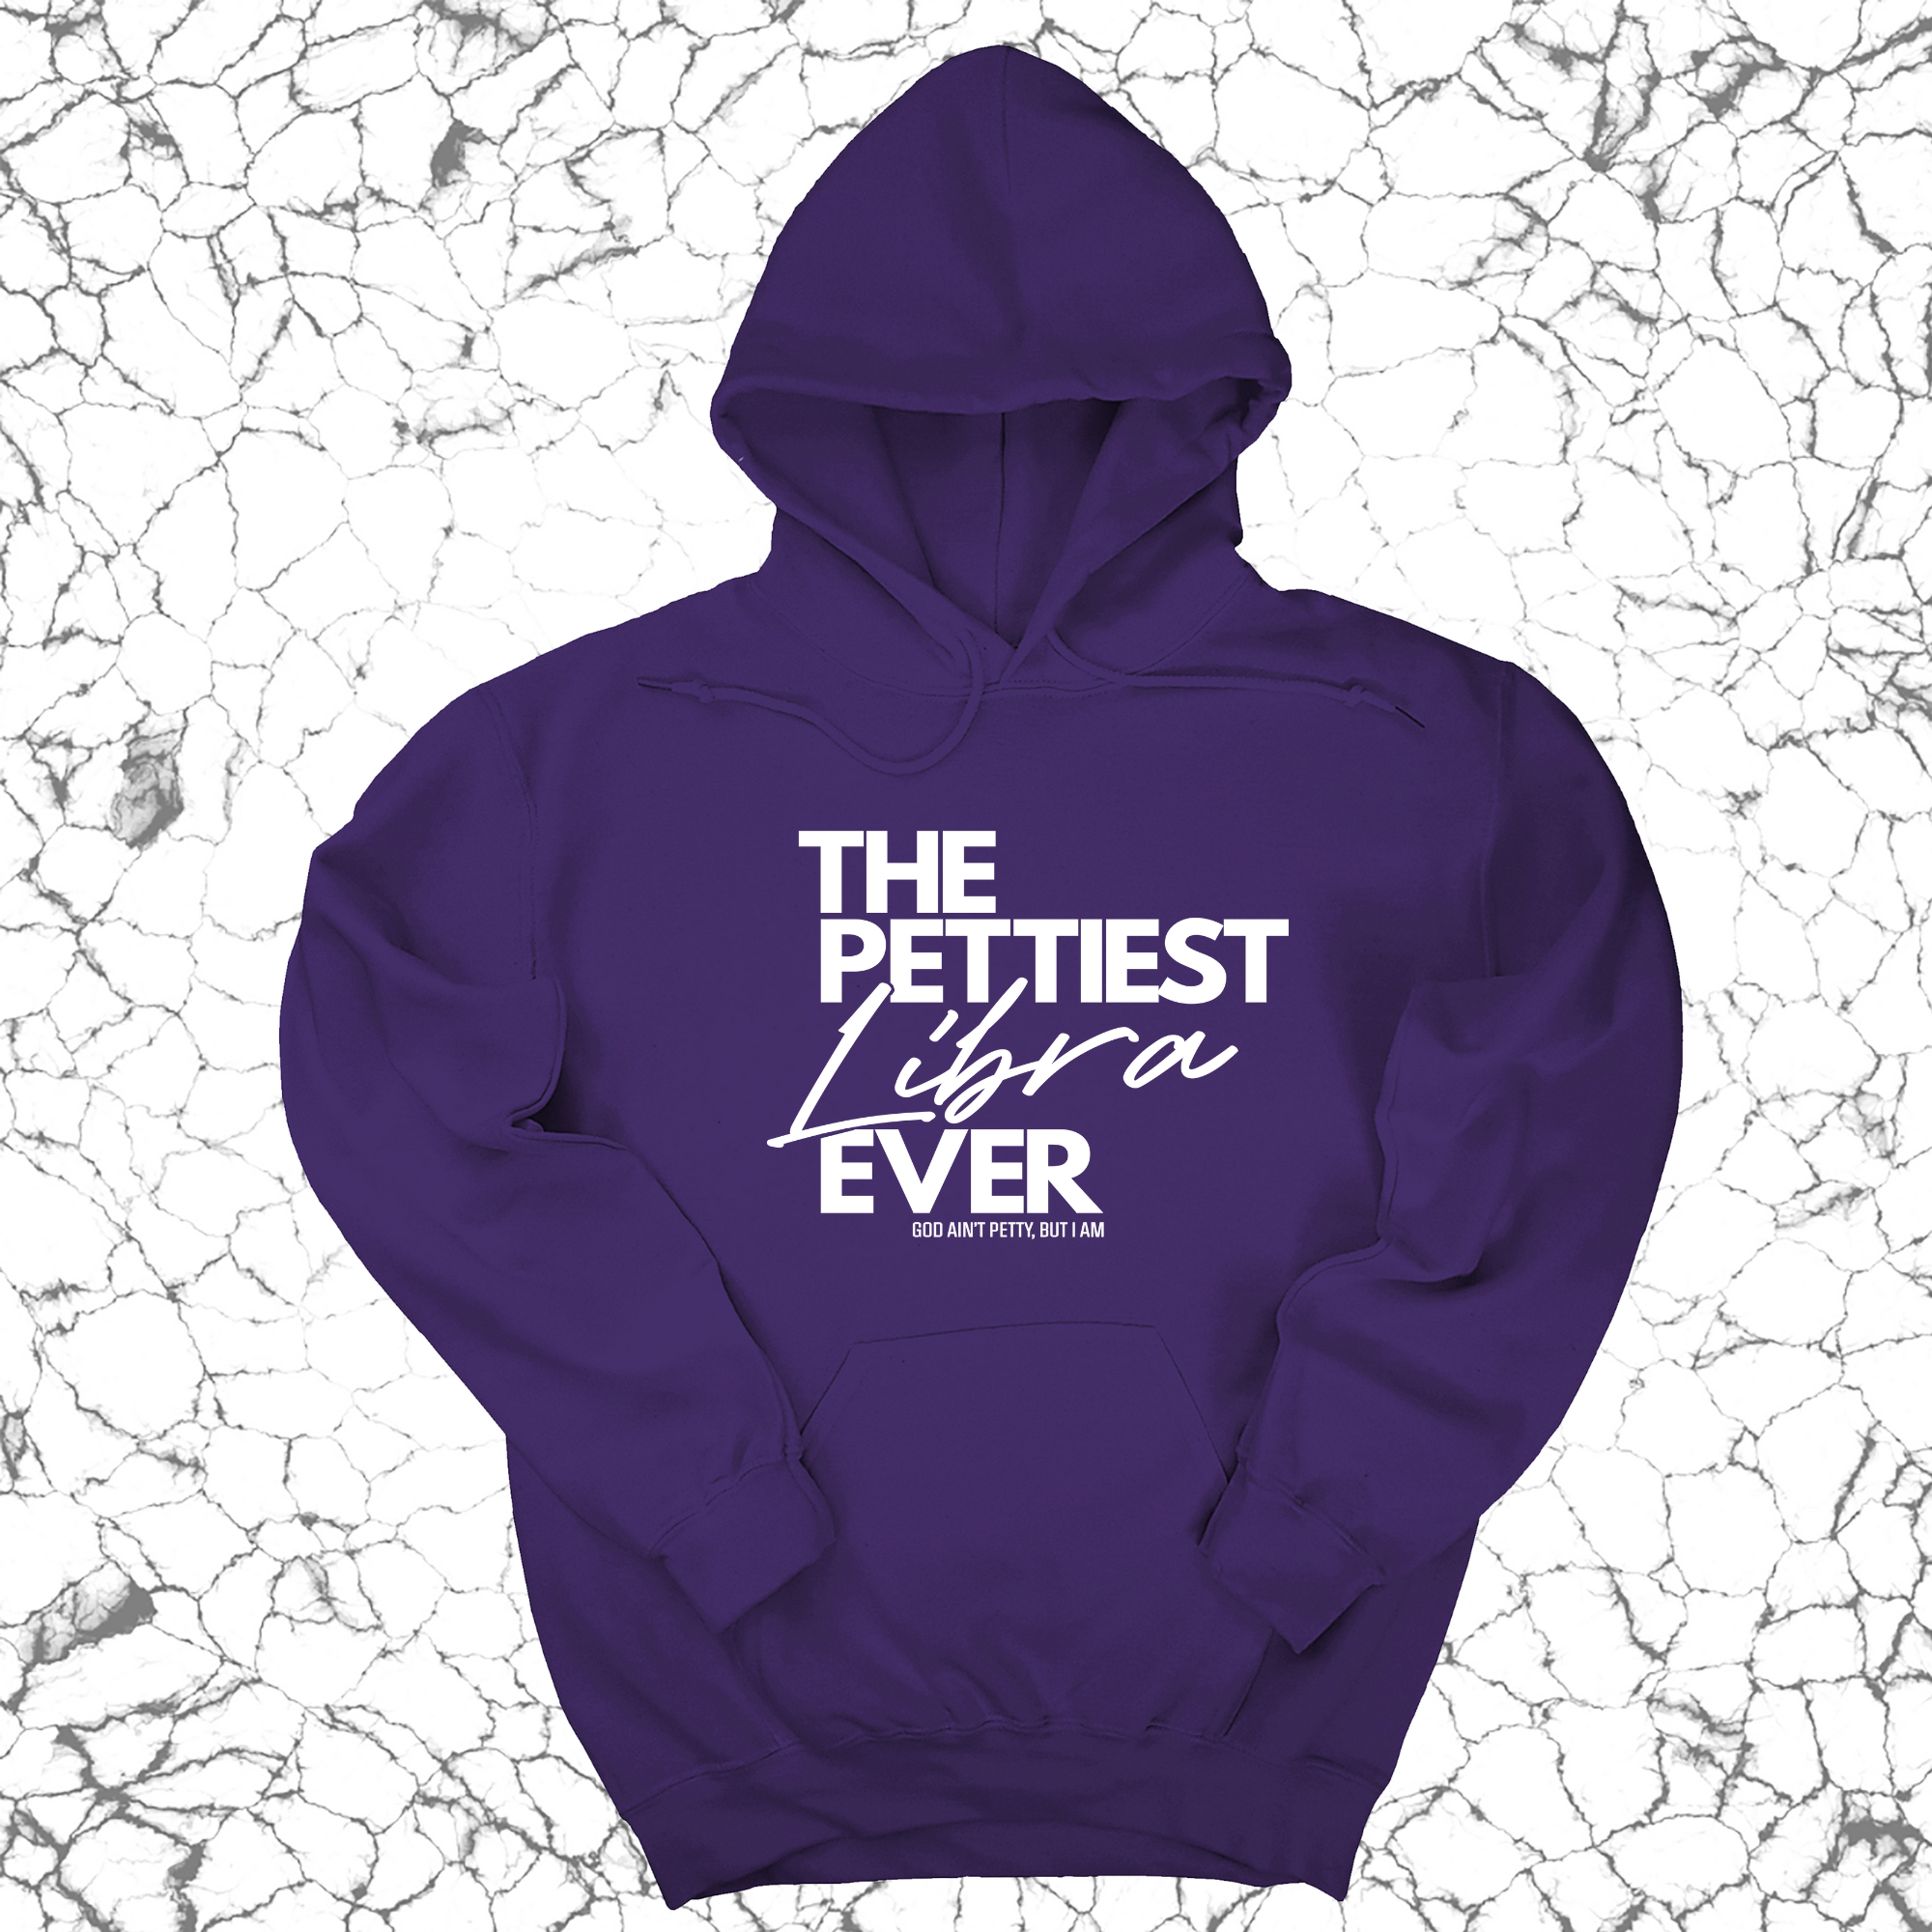 The Pettiest Libra Ever Unisex Hoodie-Hoodie-The Original God Ain't Petty But I Am